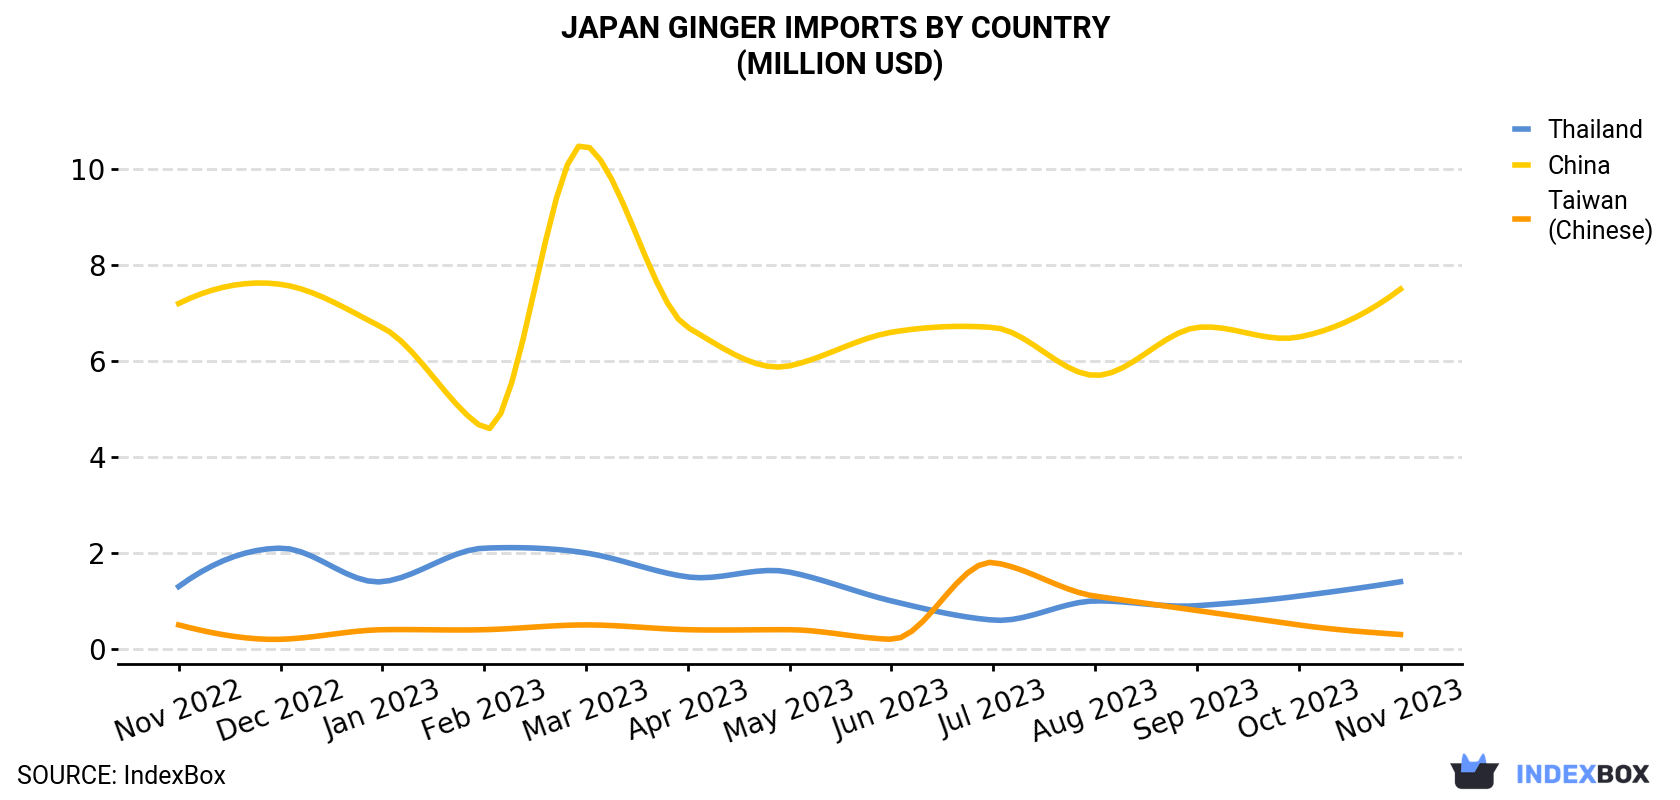 Japan Ginger Imports By Country (Million USD)